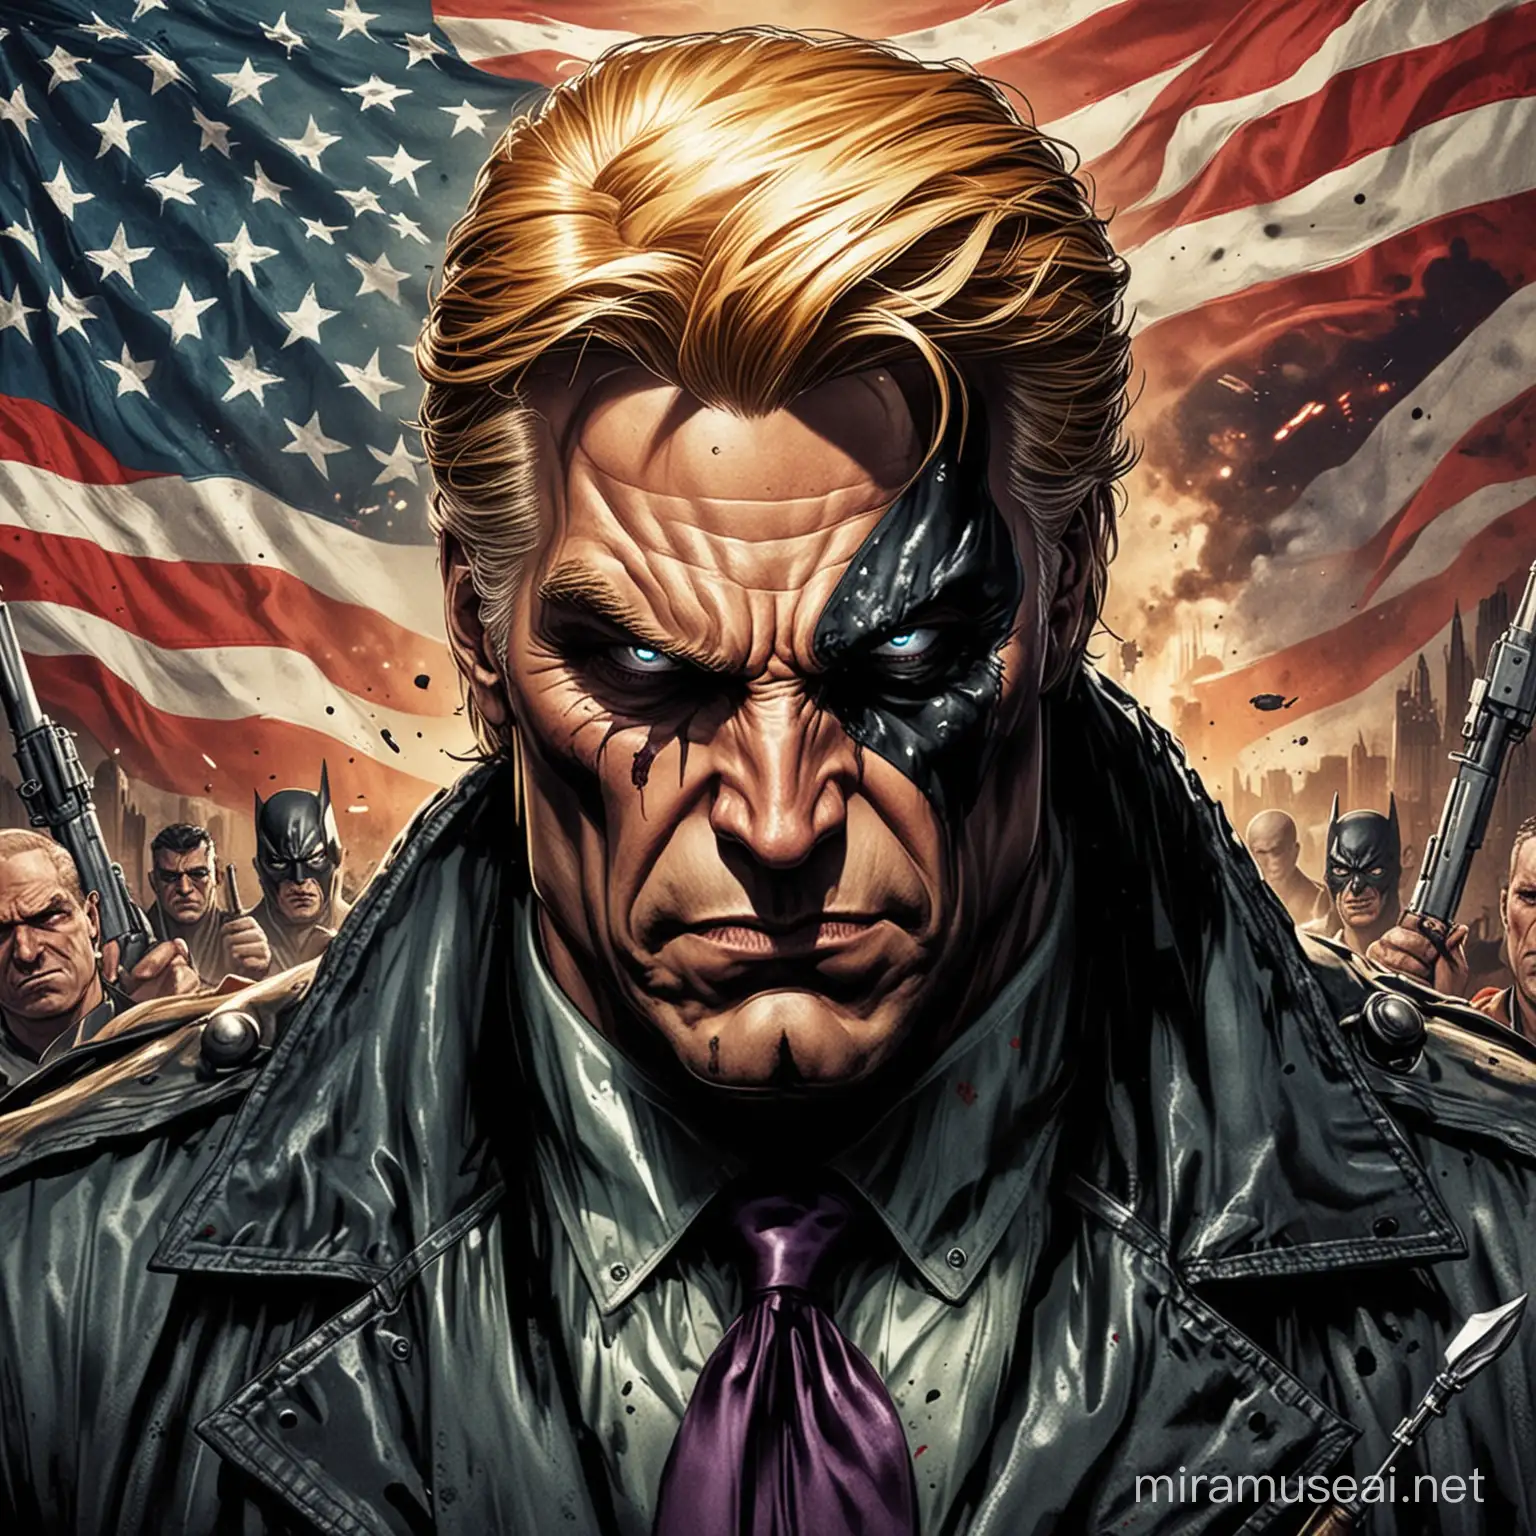 Make America as villian of comic book,make it with comic style and very detailed 